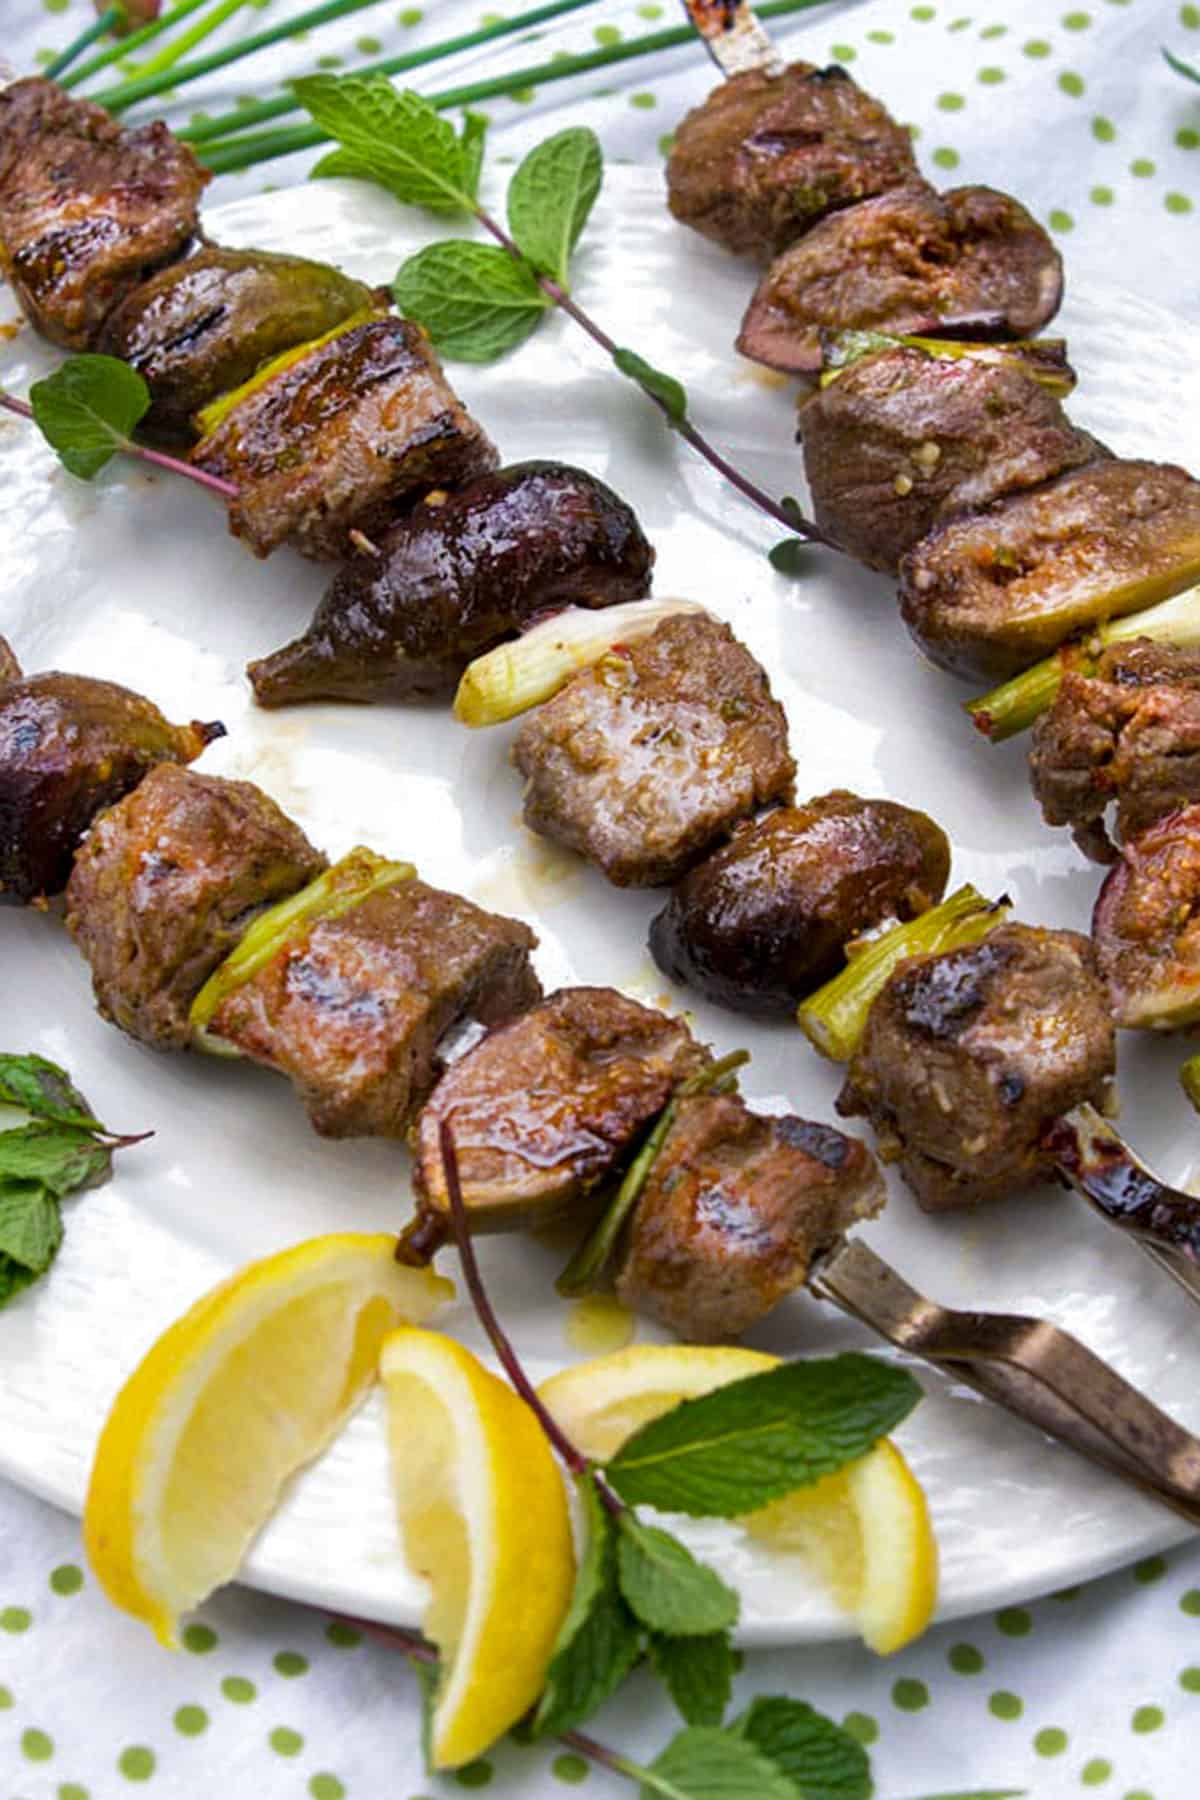 Three kebabs threaded with cubes of lamb, halved fresh figs and pieces of scallions, surrounded by lemon slices and mint sprigs